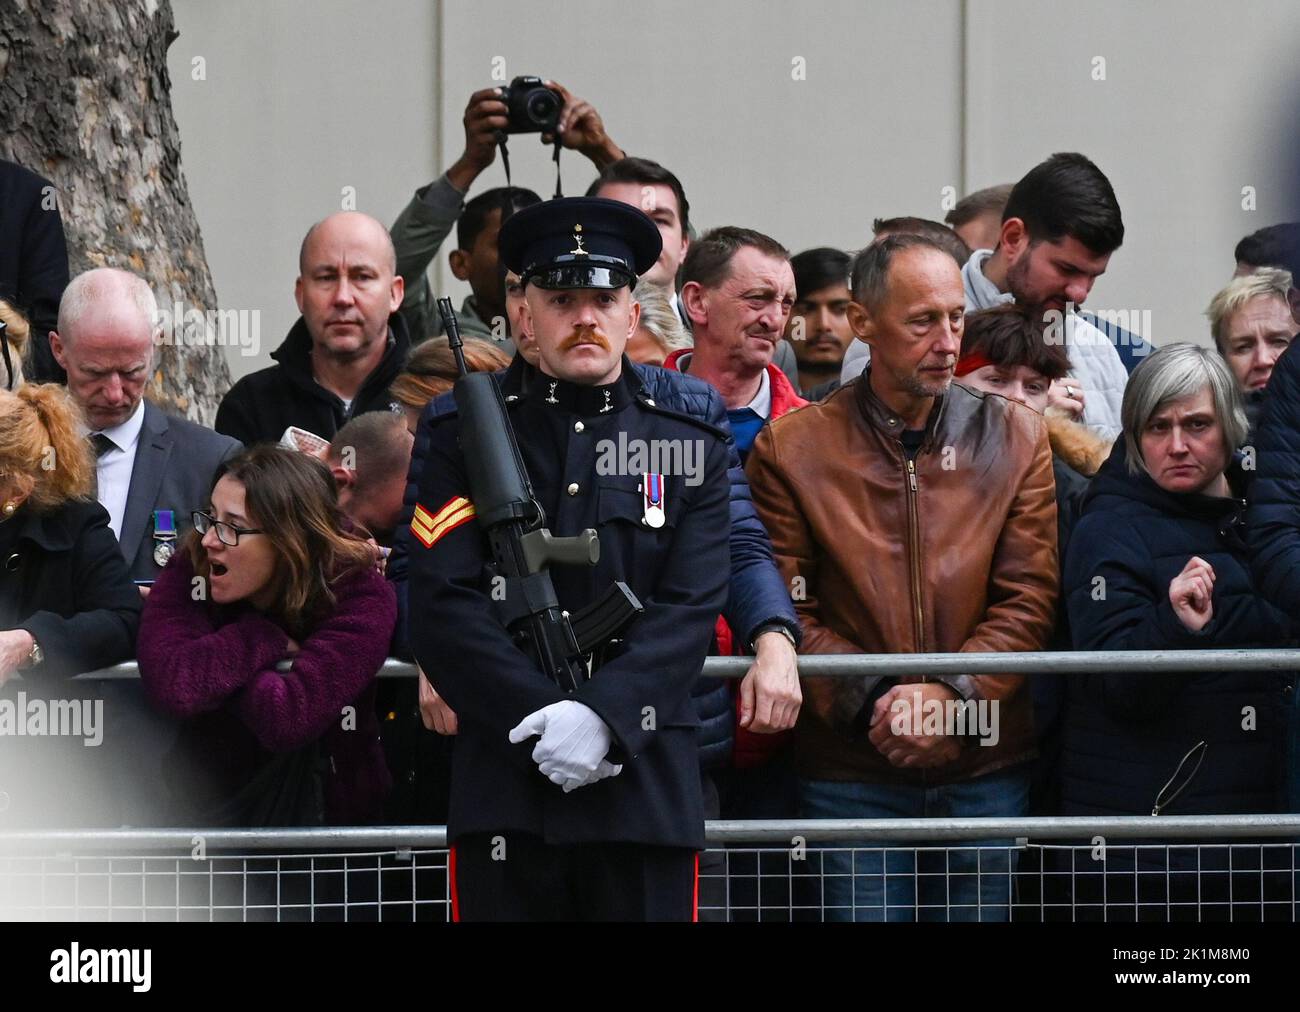 London, UK. 19th Sep, 2022. London UK 19th September 2022 - The crowd in Whitehall during the funeral procession of Queen Elizabeth II in London today: Credit Simon Dack / Alamy Live News Credit: Simon Dack News/Alamy Live News Stock Photo